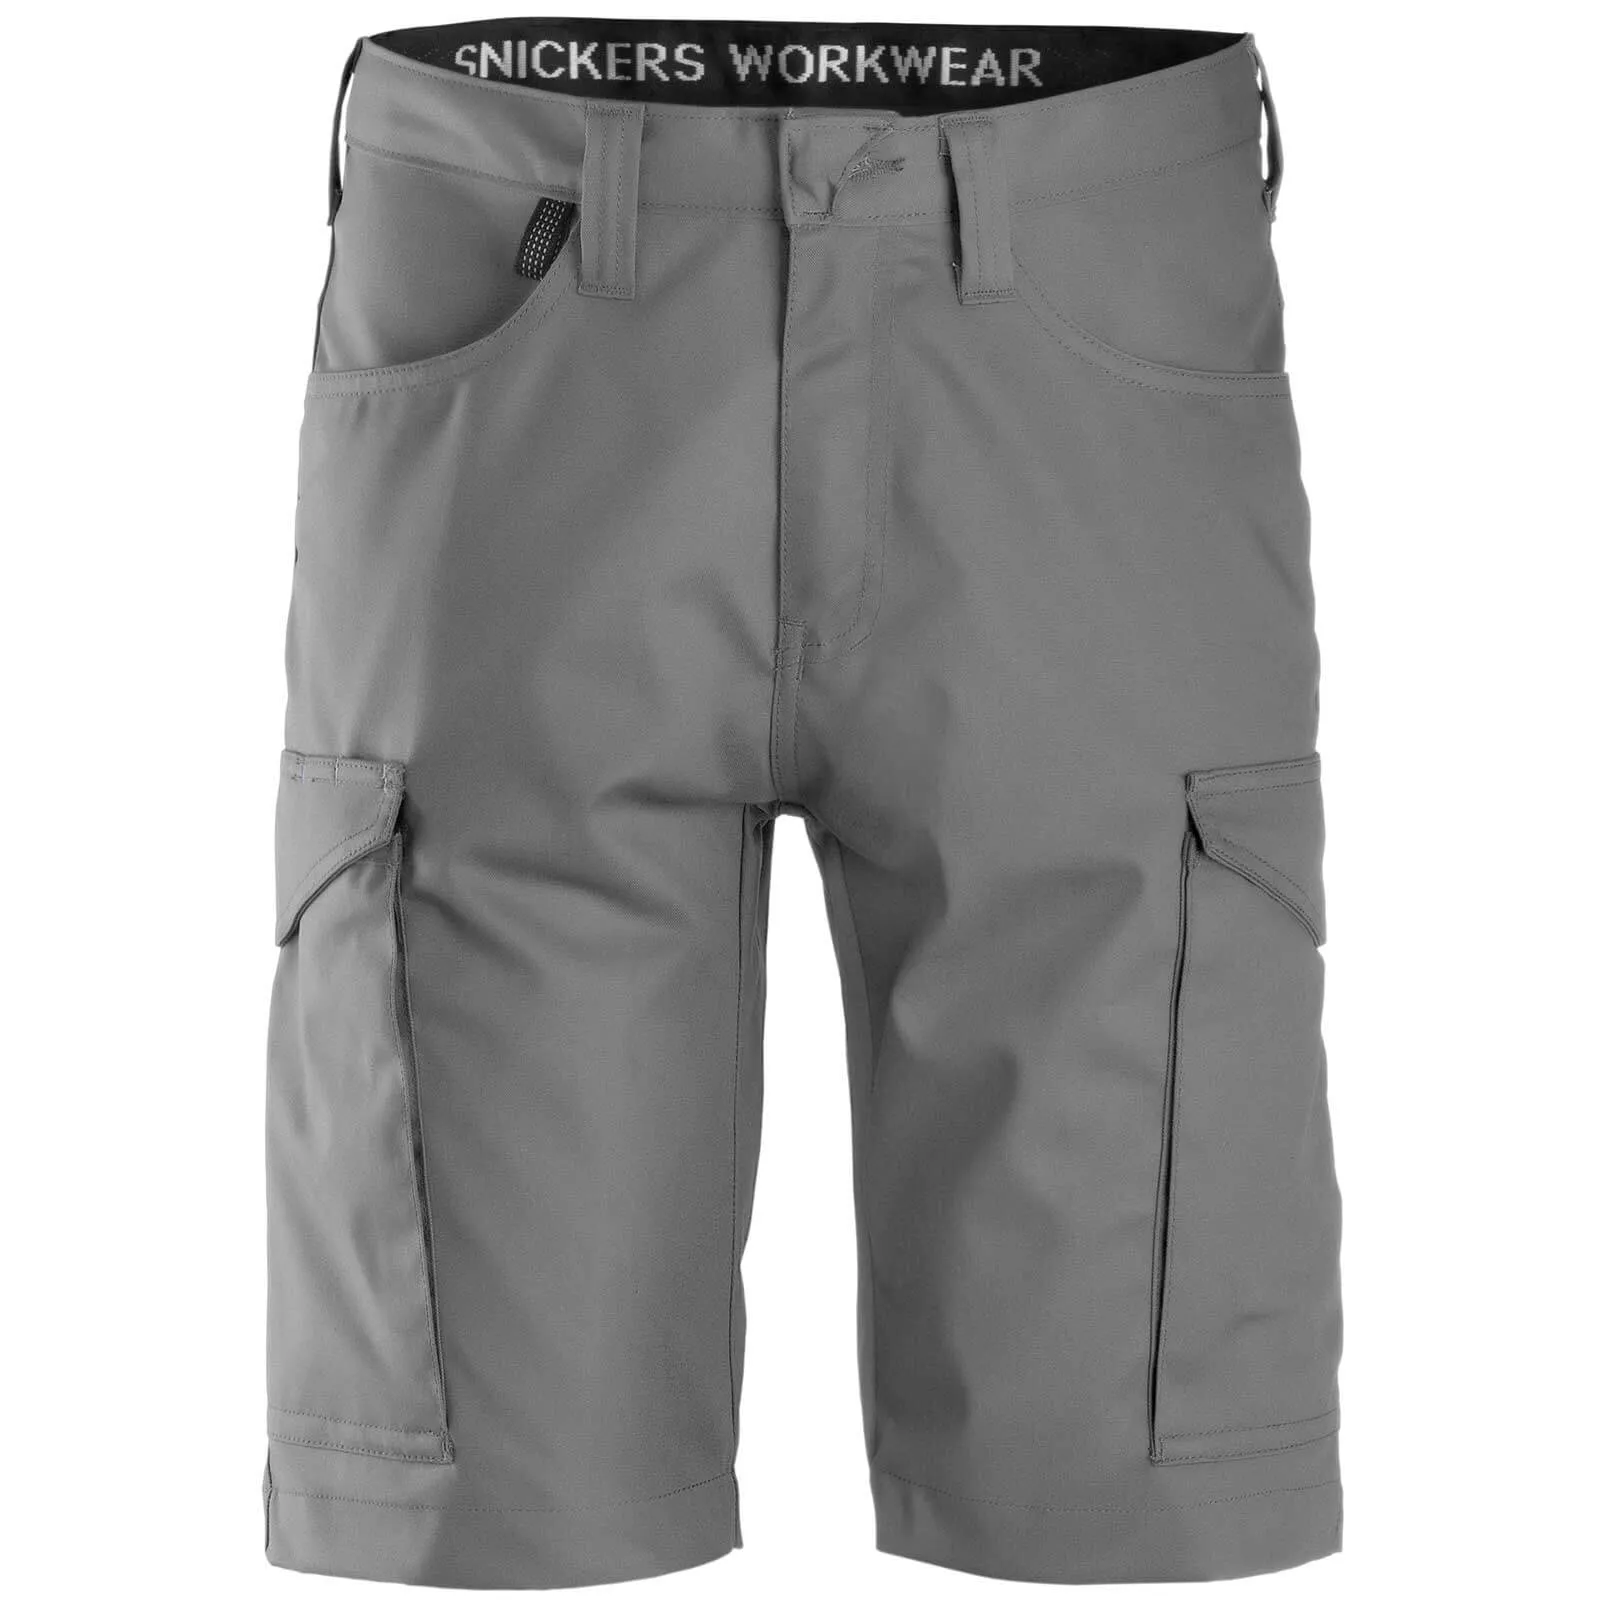 Snickers 6100 Mens Service Shorts - Grey, 44"